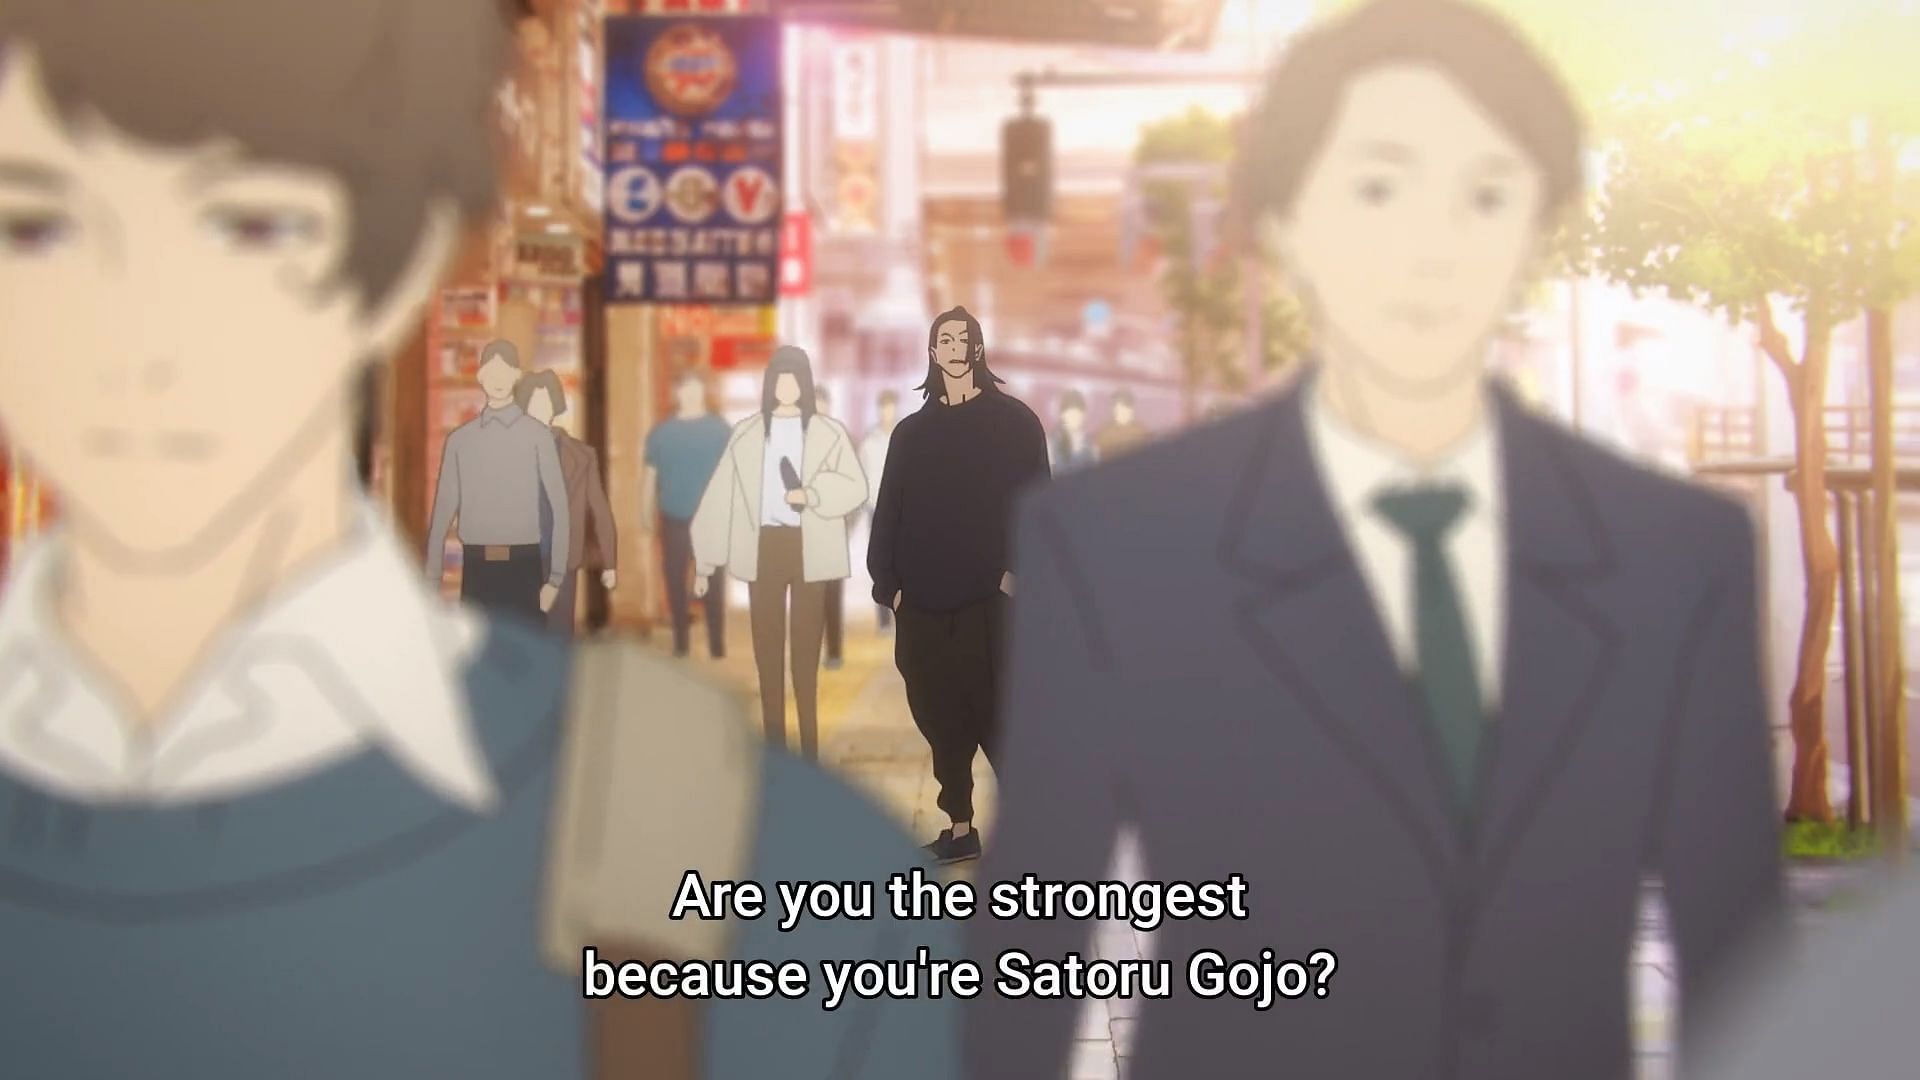 Why did Suguru Geto say "Are you the strongest because you are Satoru